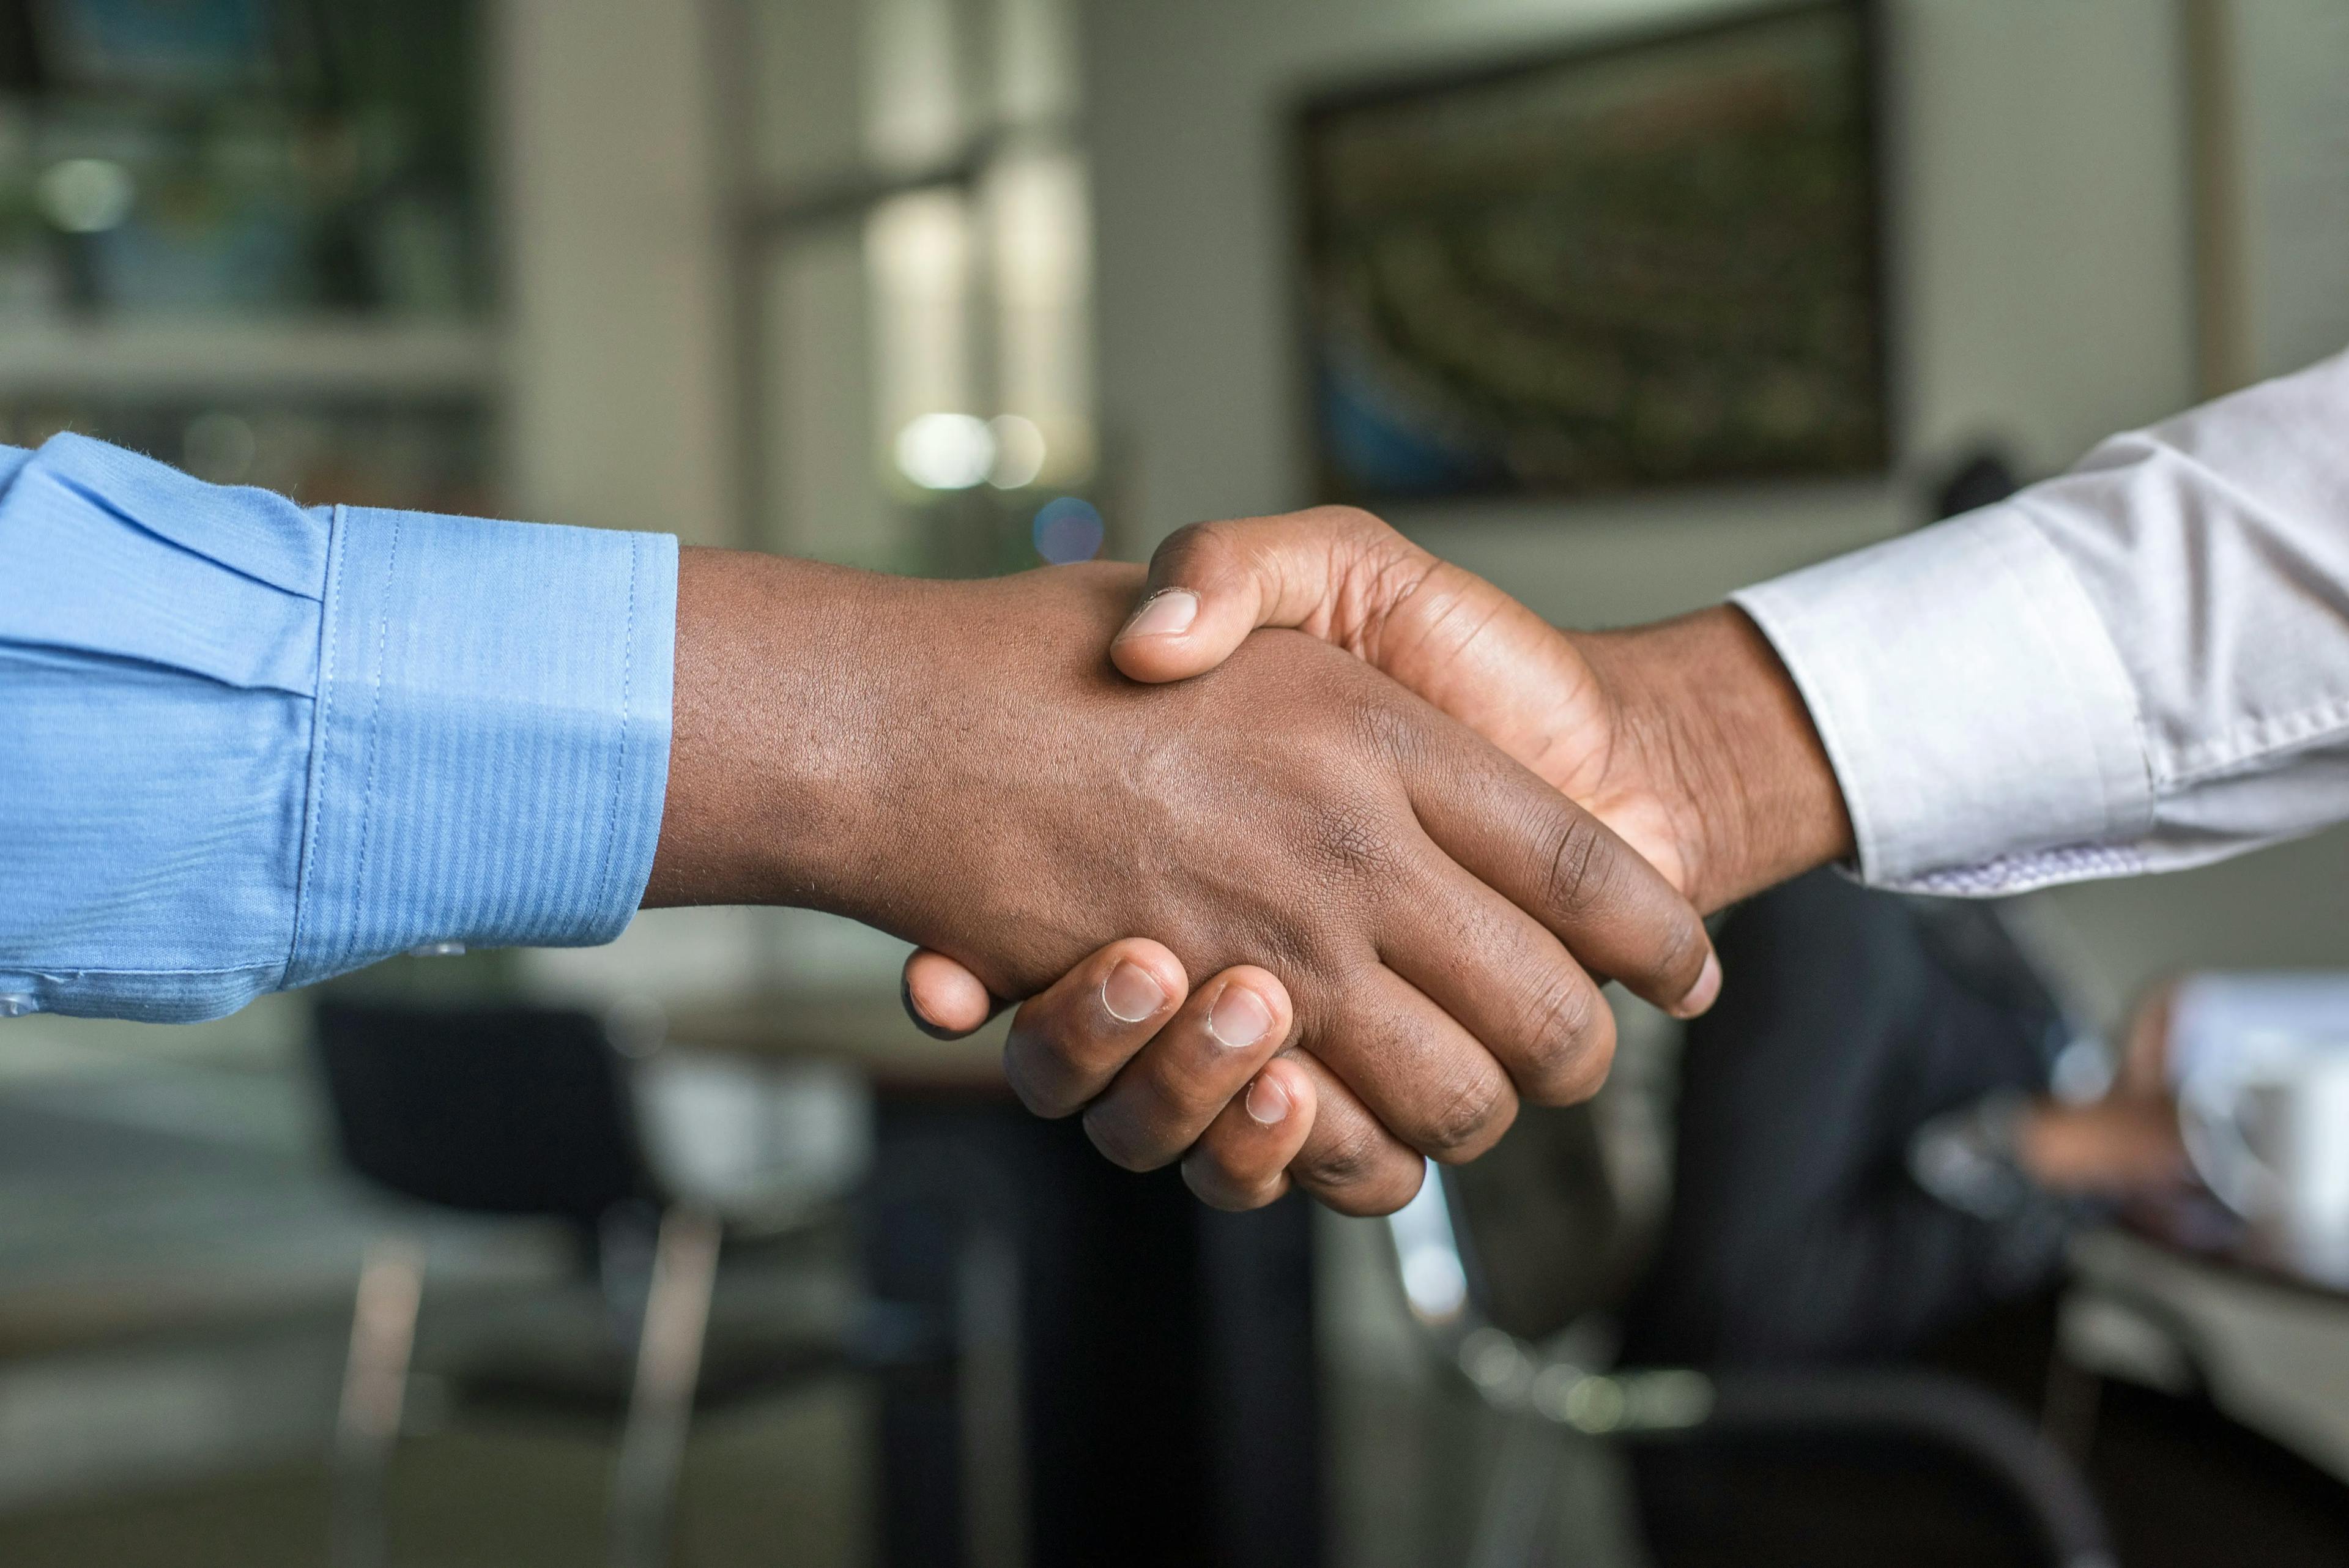 Two professionals shaking hands in a modern office setting, symbolizing a successful business deal.